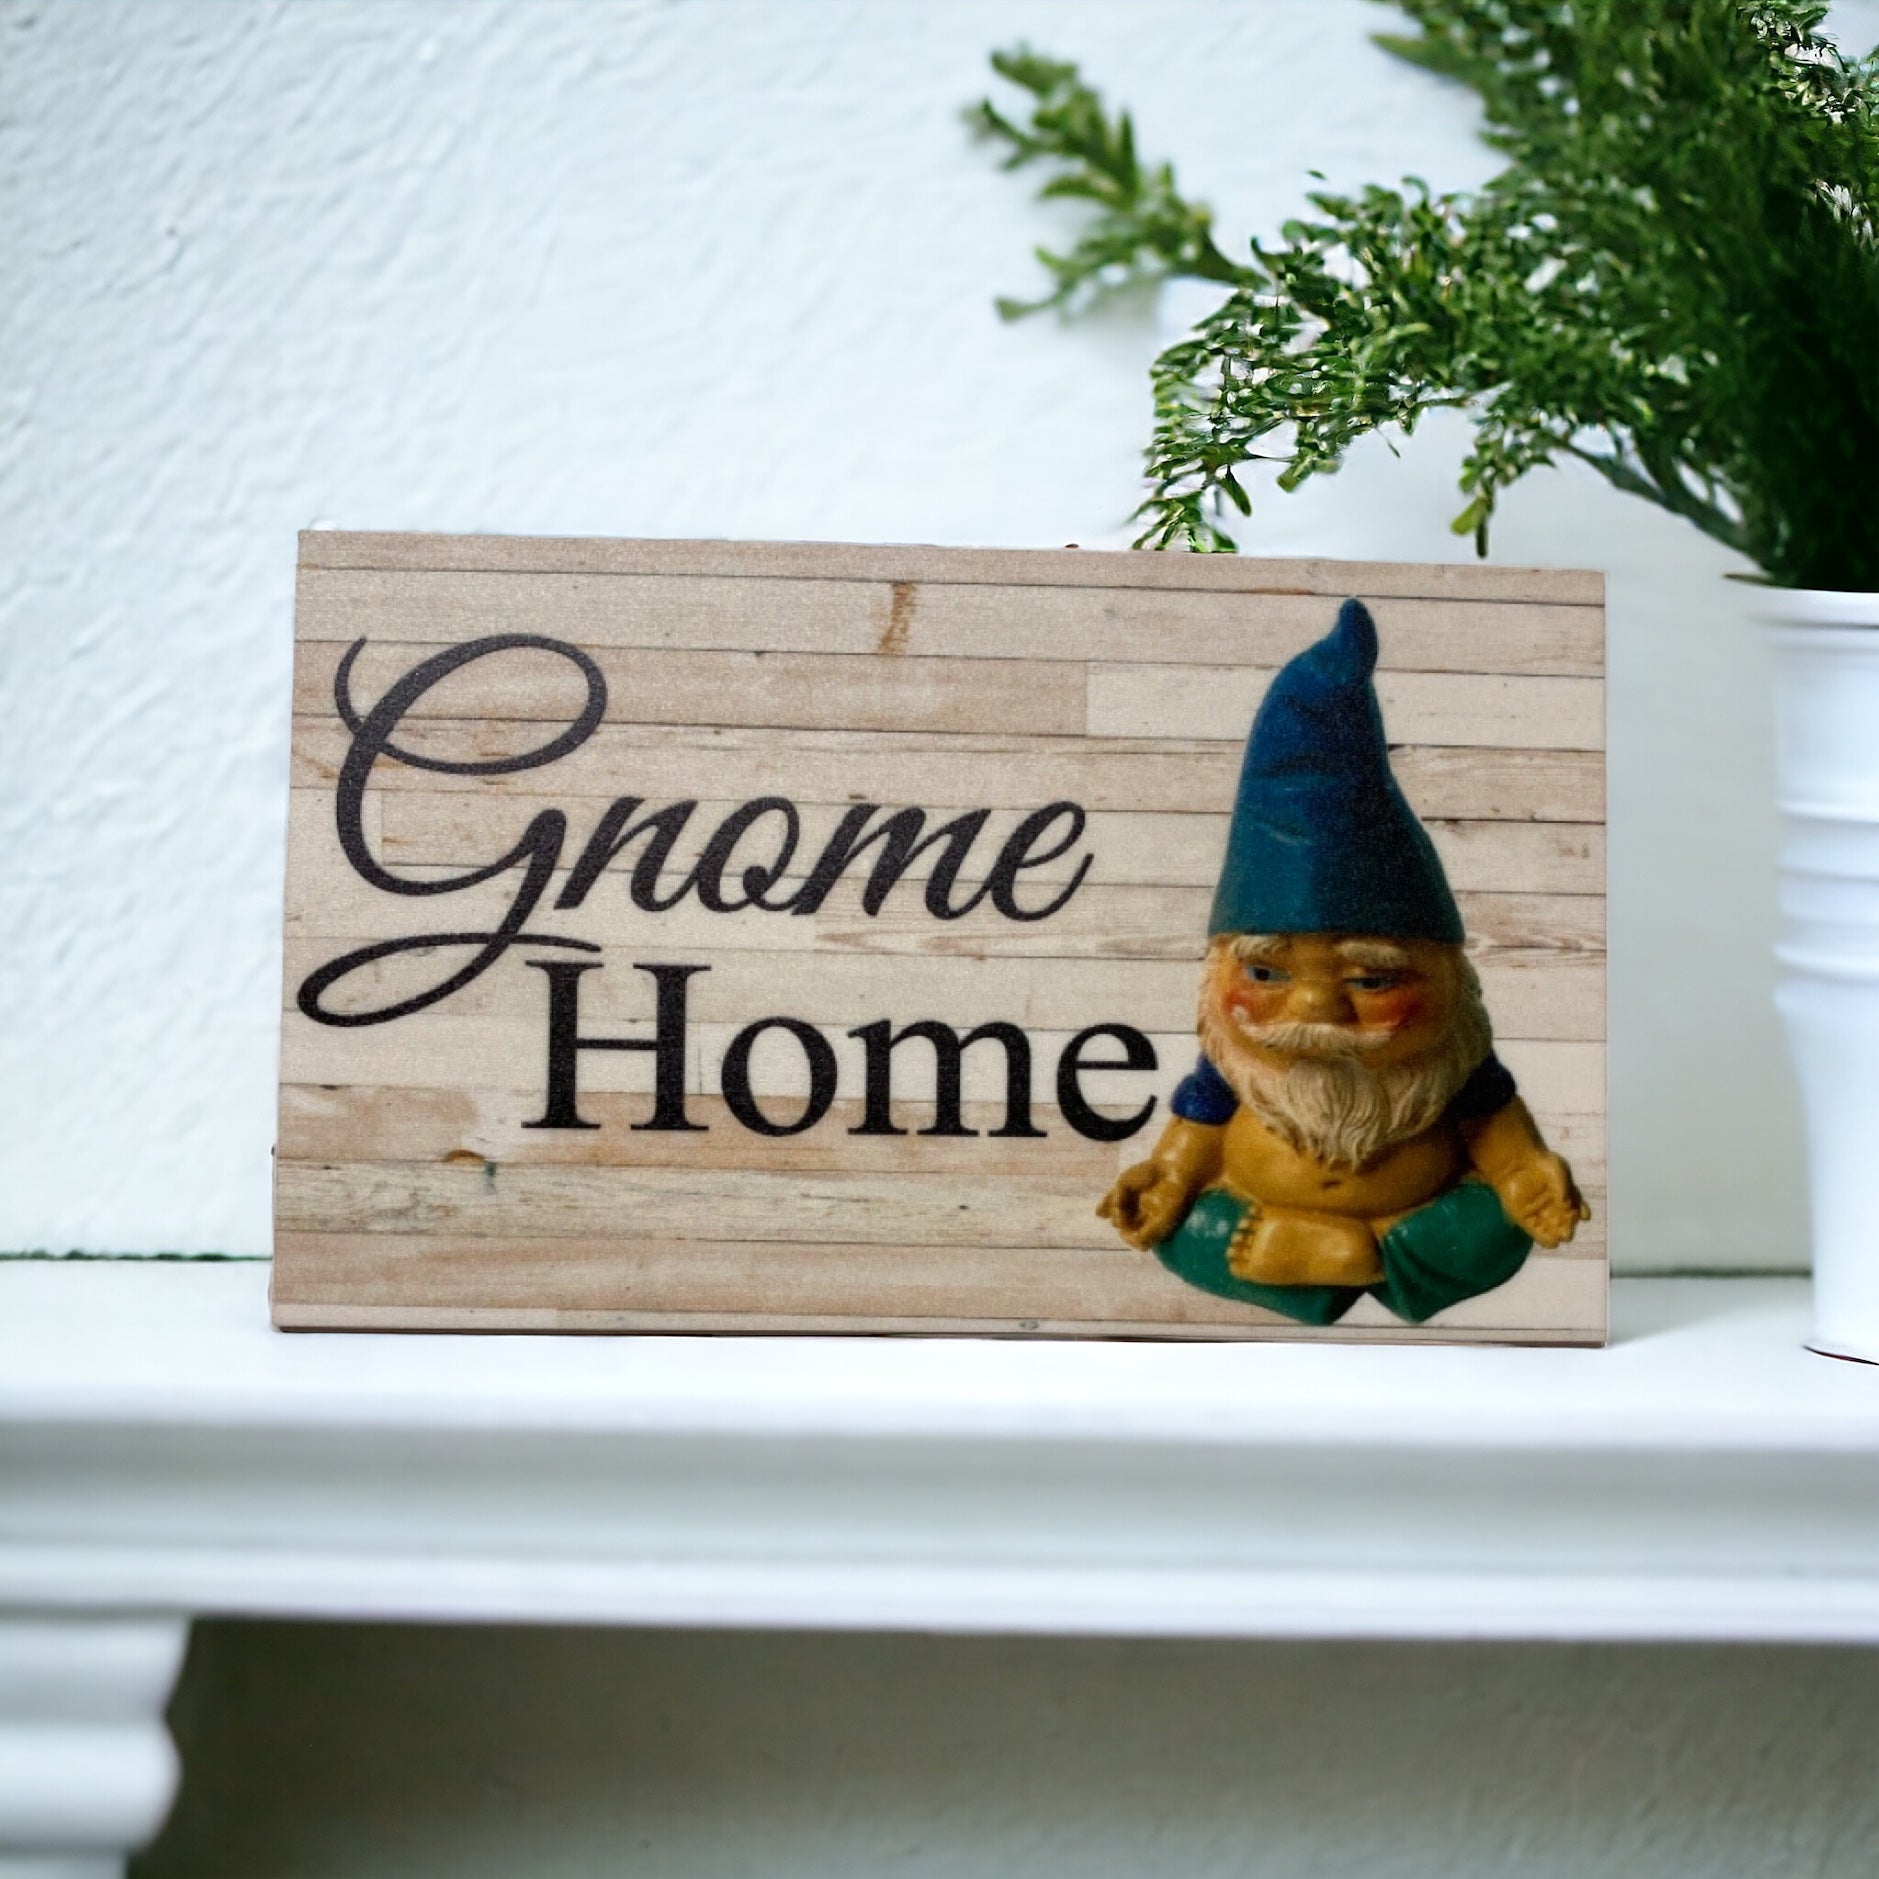 Gnome Home Rustic Sign - The Renmy Store Homewares & Gifts 